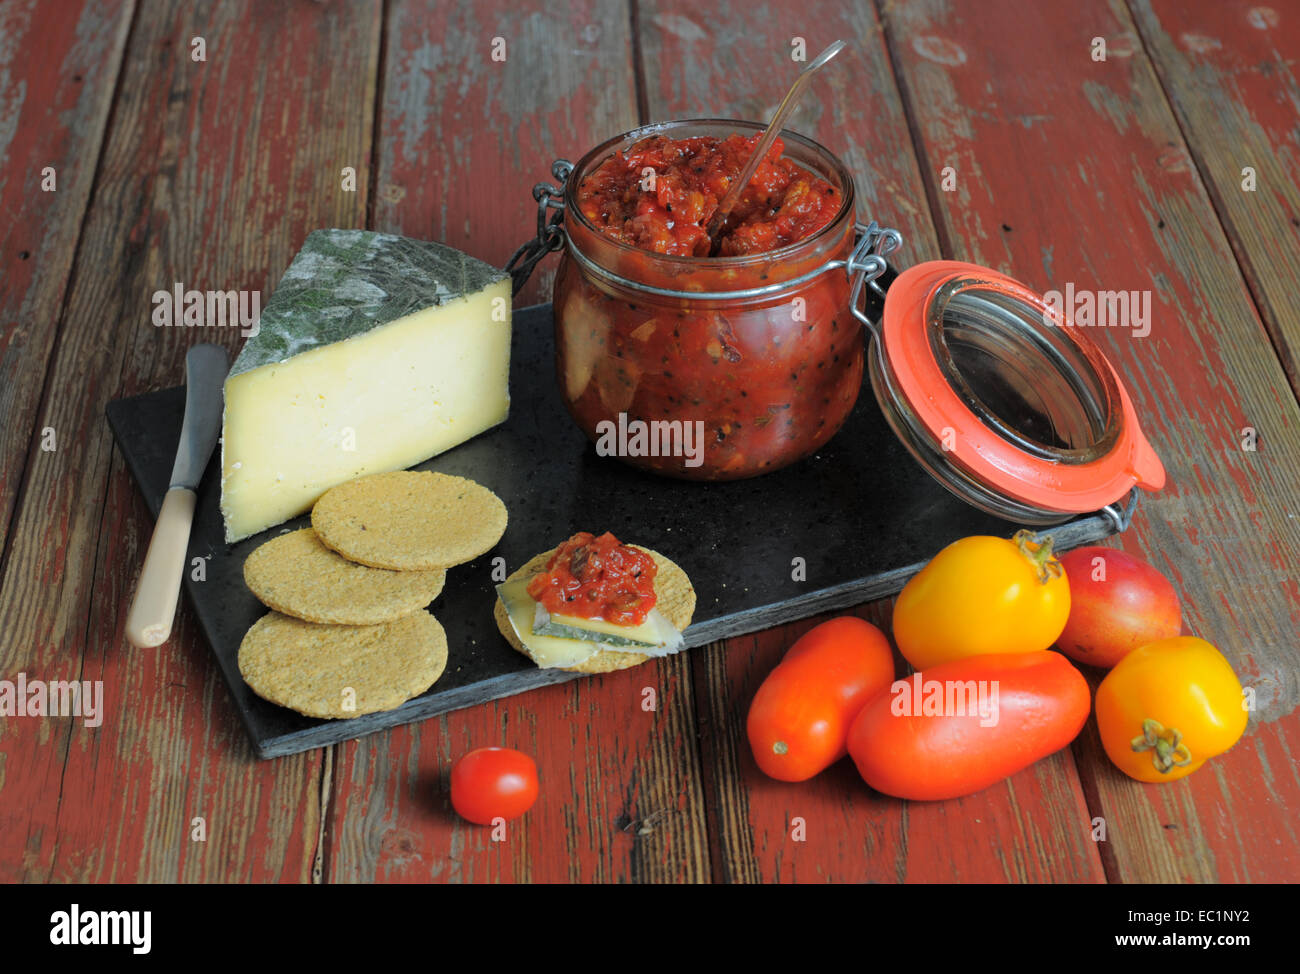 Cheese and biscuits with tomato chutney. Stock Photo